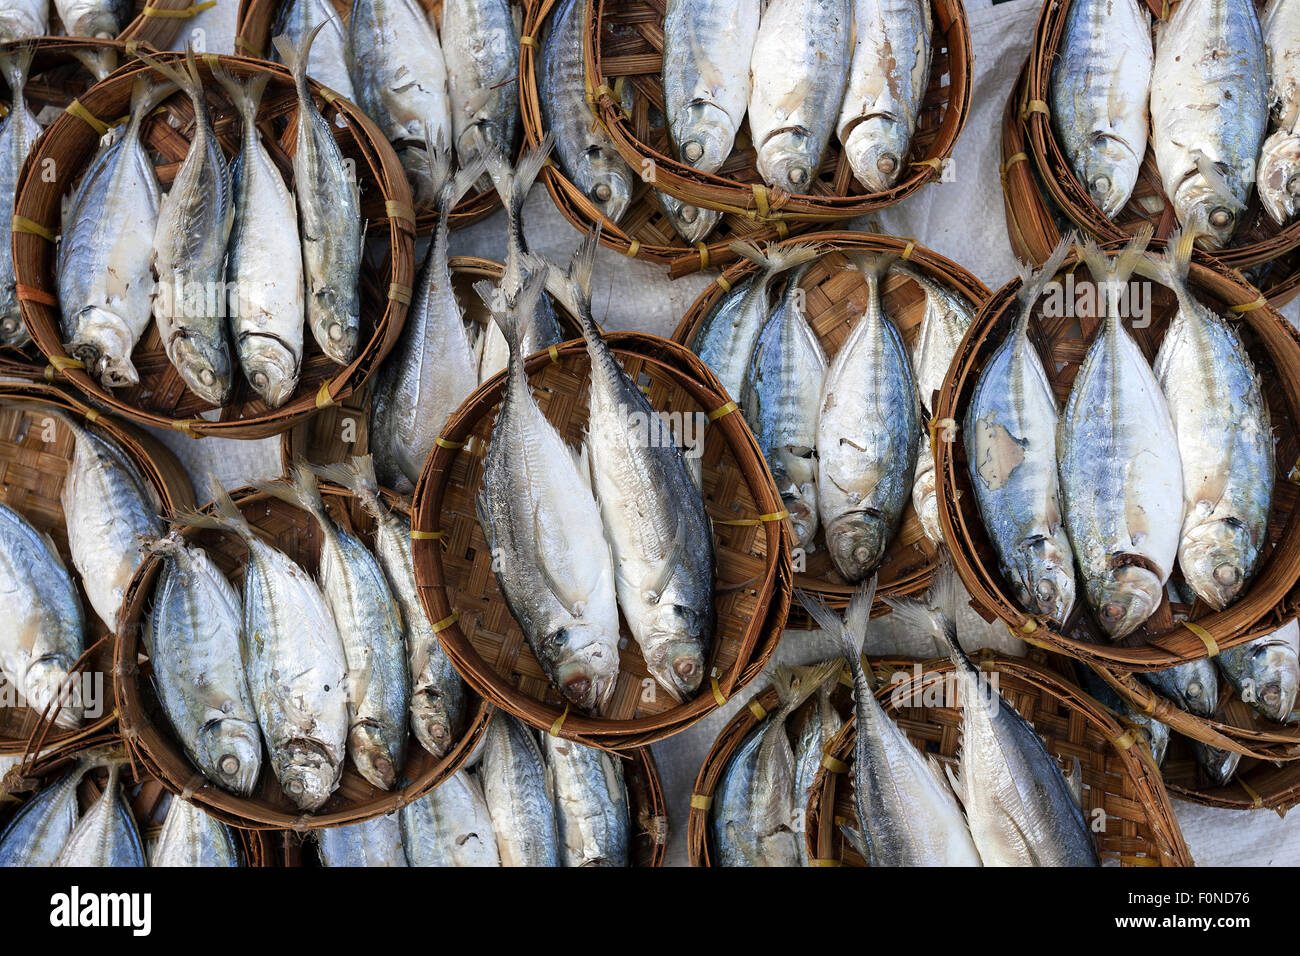 Fish in round baskets at a stall in a market, local market in Kyaing Tong, Shan State, Myanmar Stock Photo